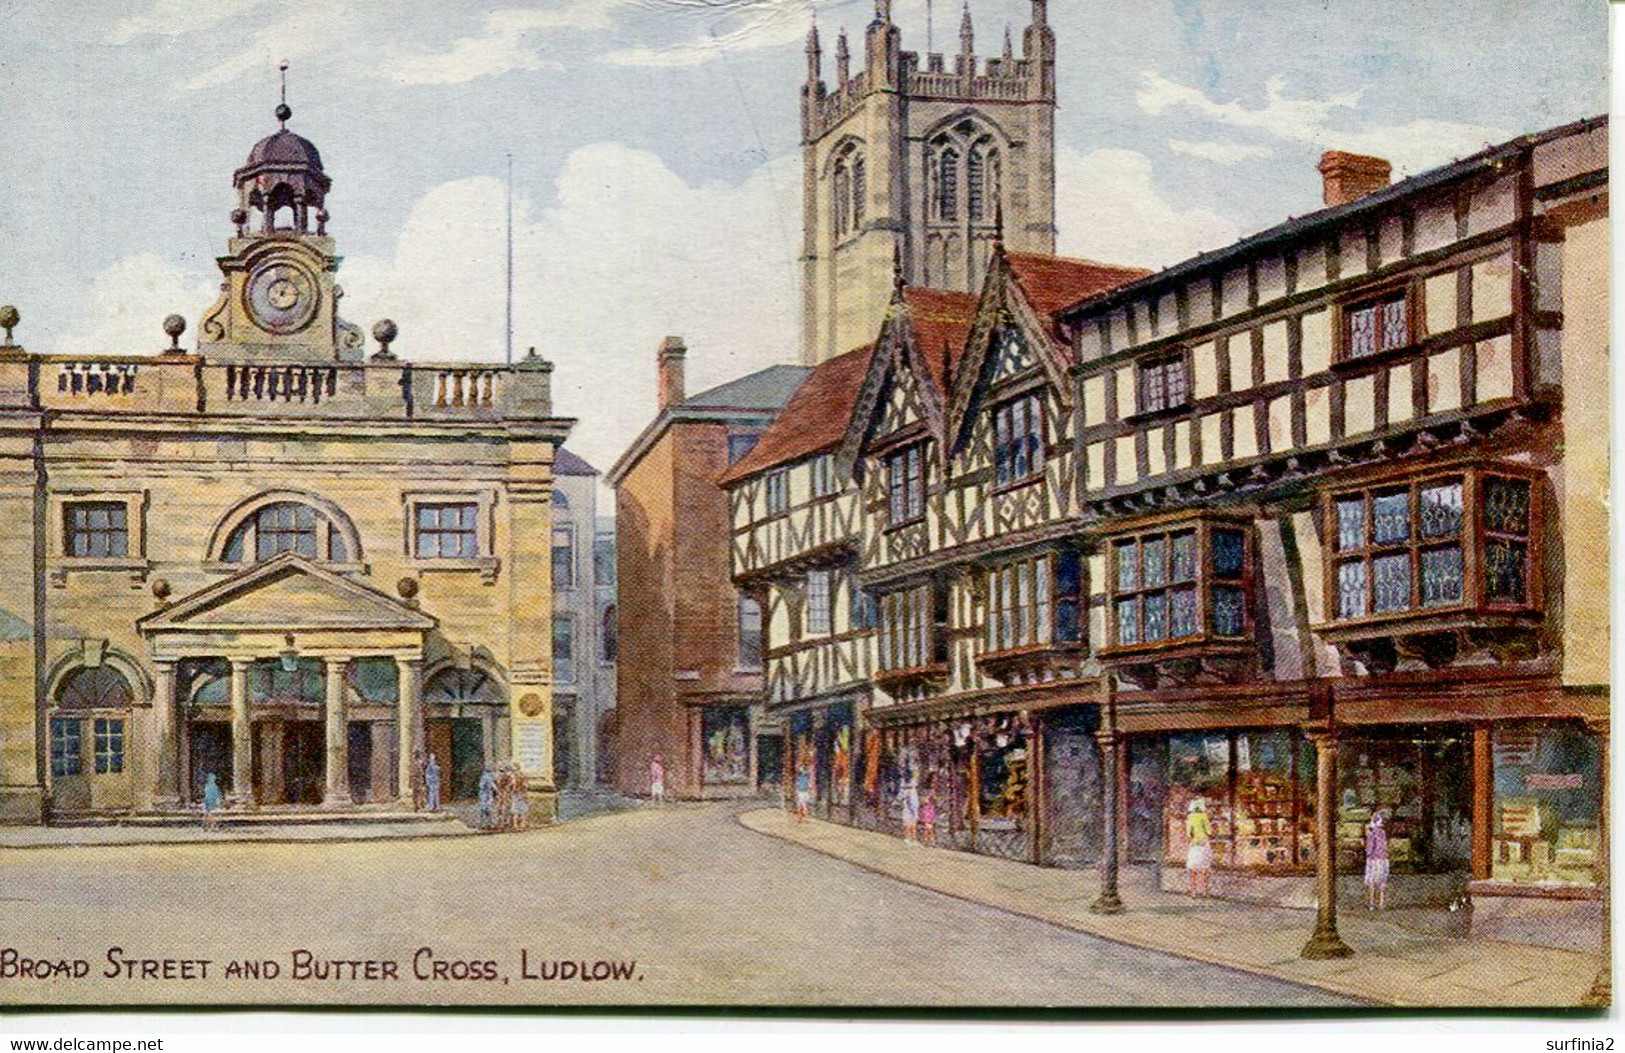 A R QUINTON - SALMON - 1963 - BROAD STREET AND BUTTER CROSS, LUDLOW - NO HORSE/CART - Quinton, AR